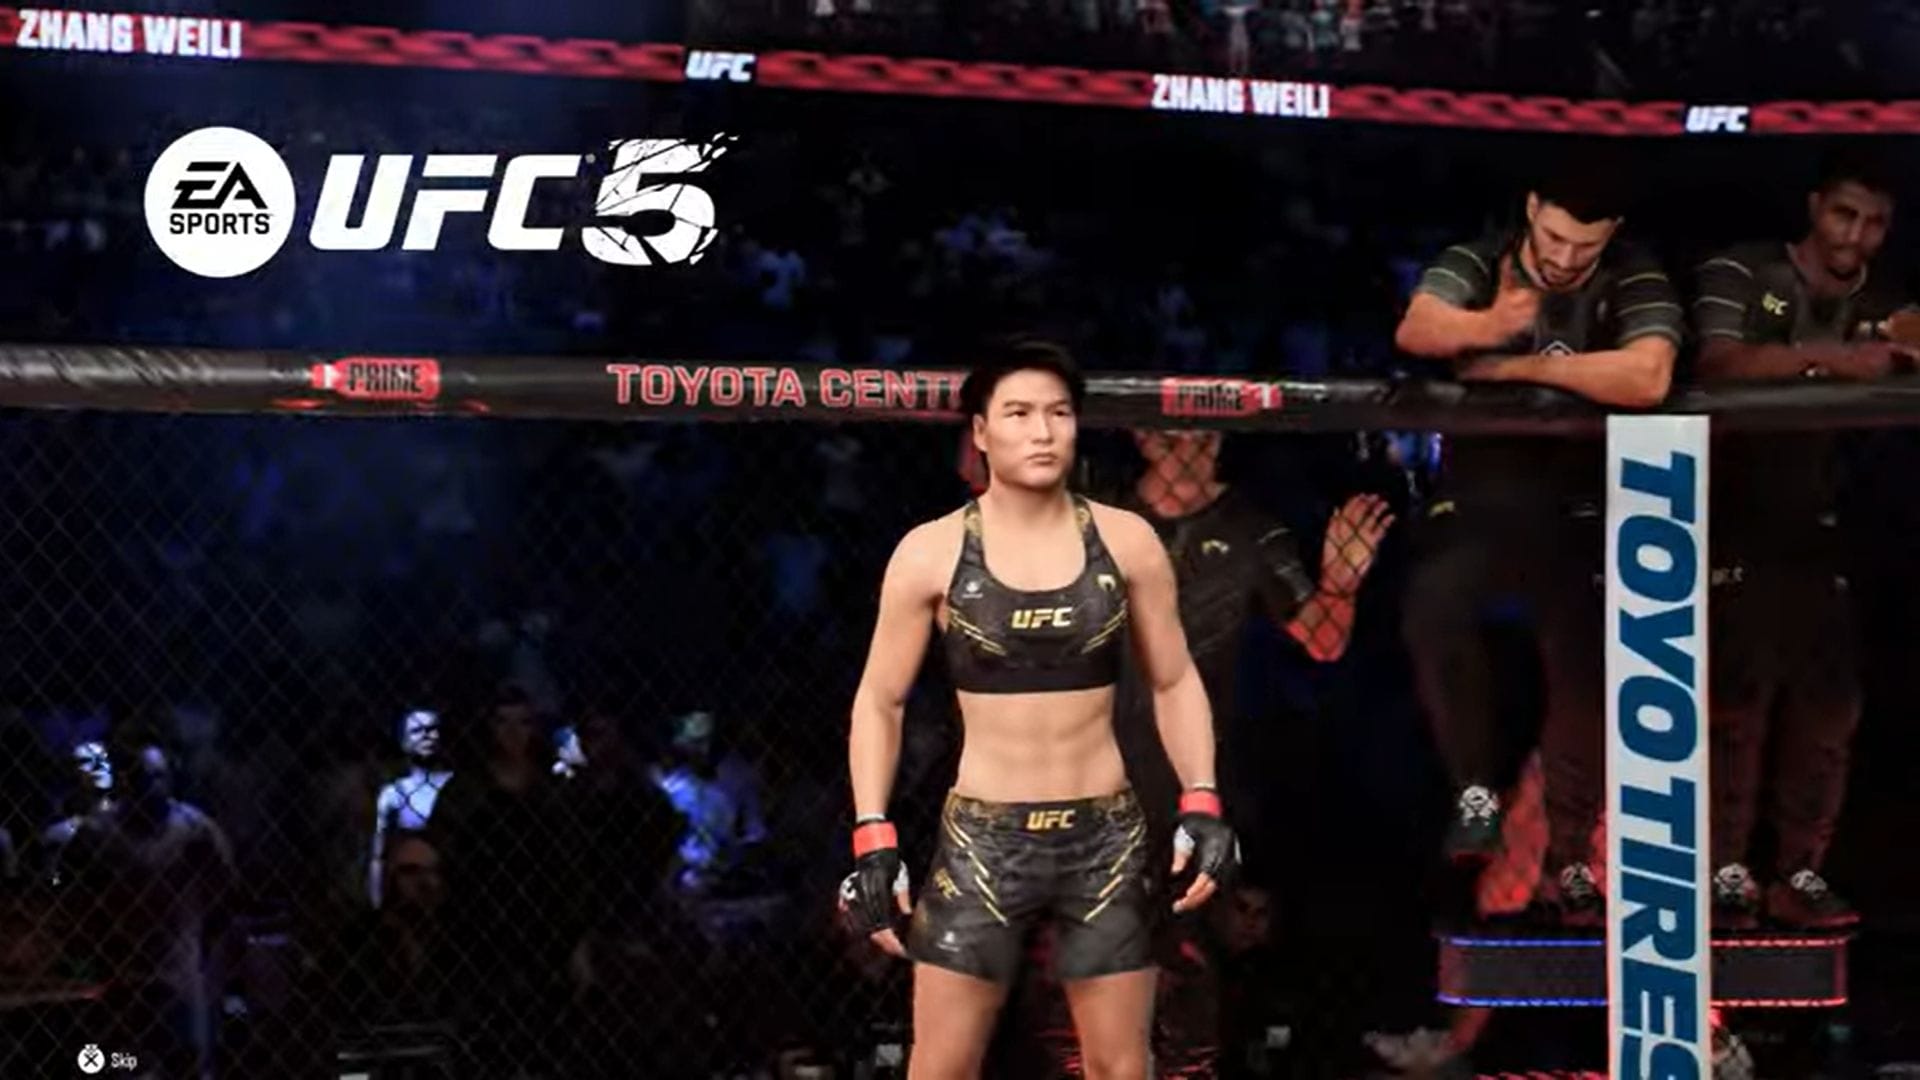 UFC 5 Shows Off Its Fancy New Graphics & Technology